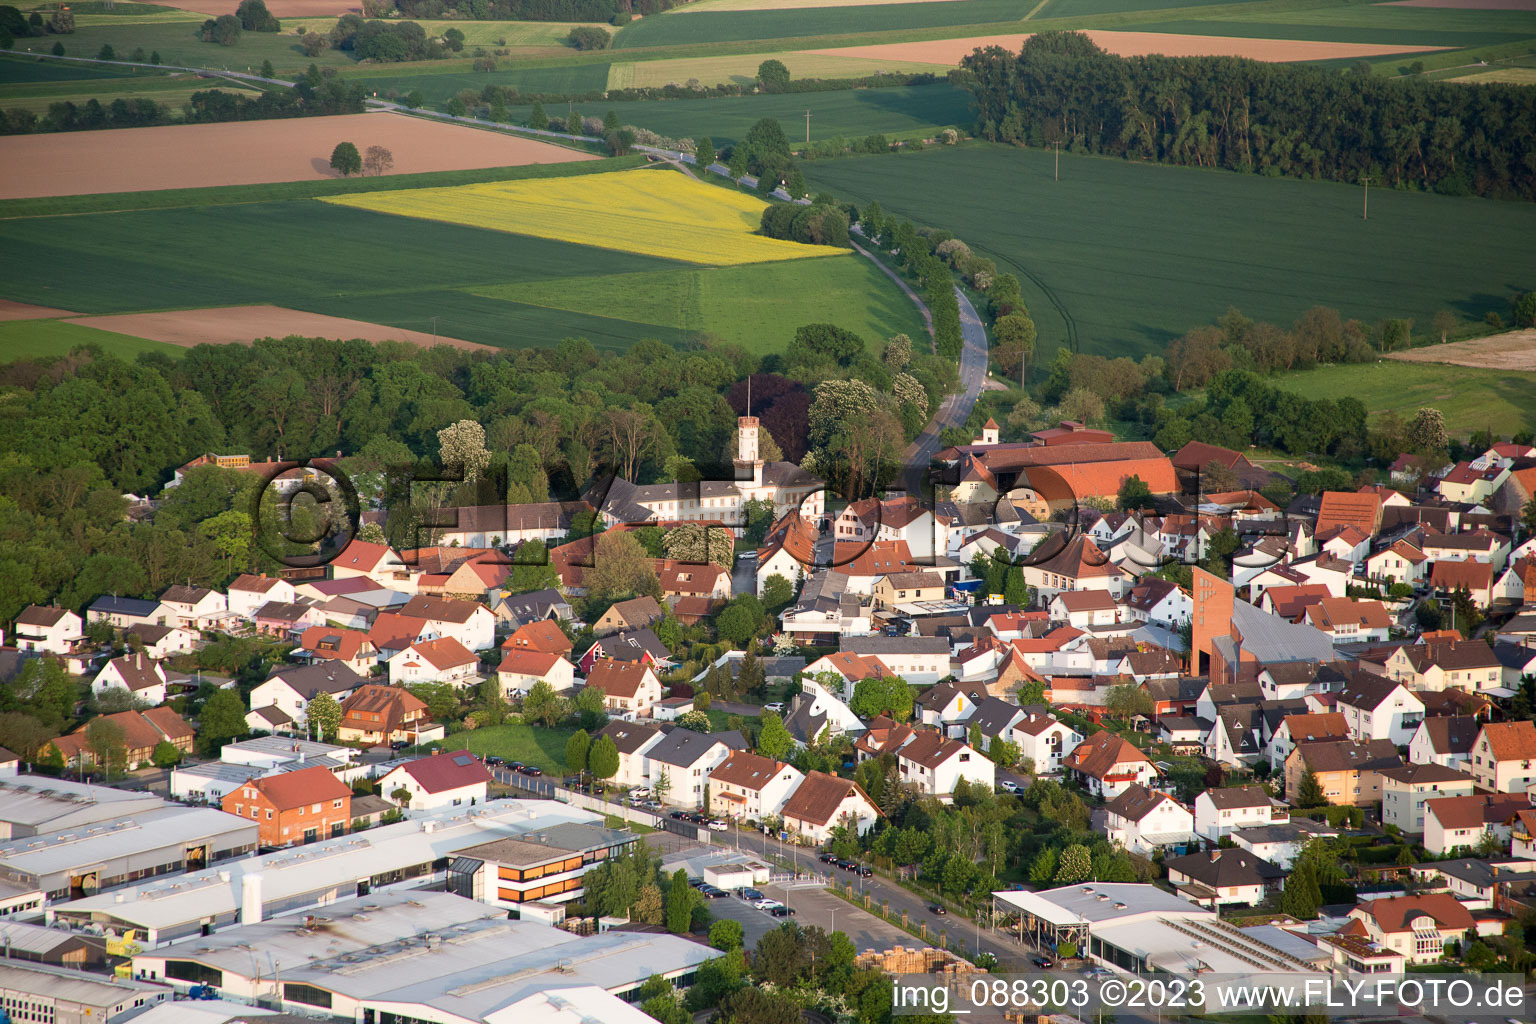 Hüttenfeld in the state Hesse, Germany from the plane